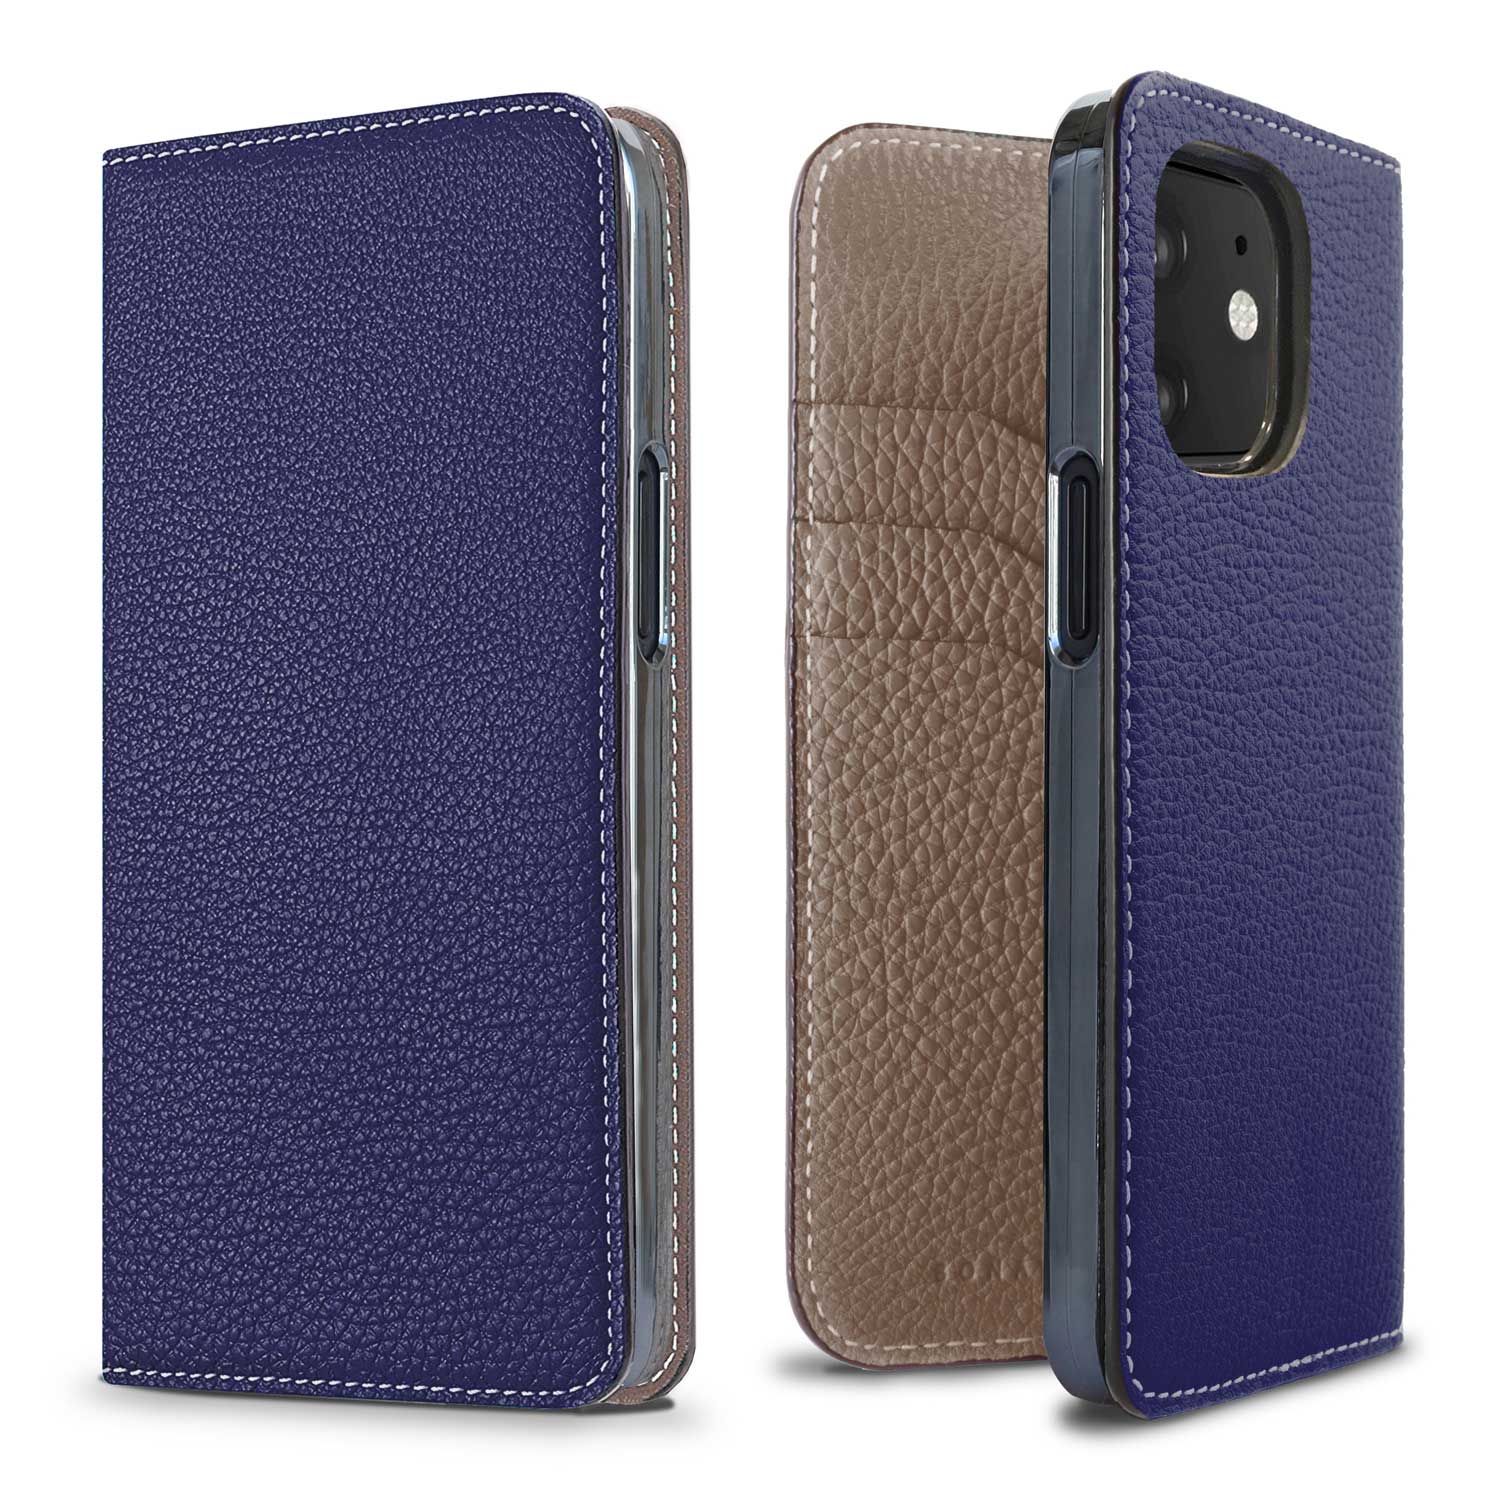 (iPhone 12 mini) Diary case in shrink leather